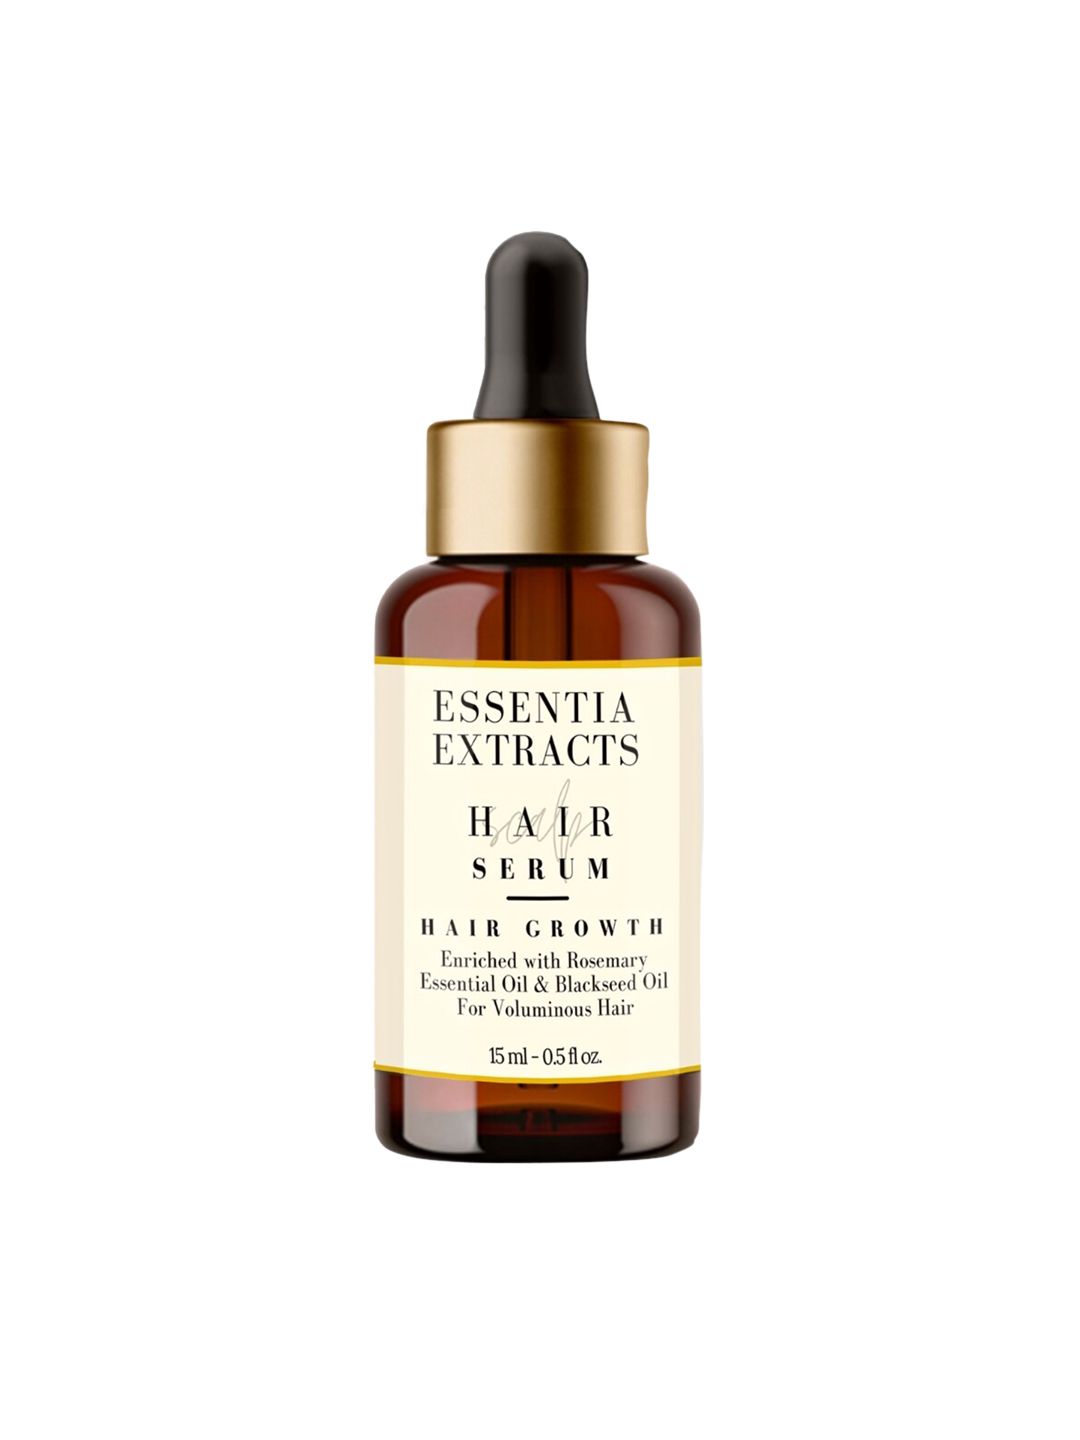 ESSENTIA EXTRACTS Hair Growth Serum - 15 ml Price in India